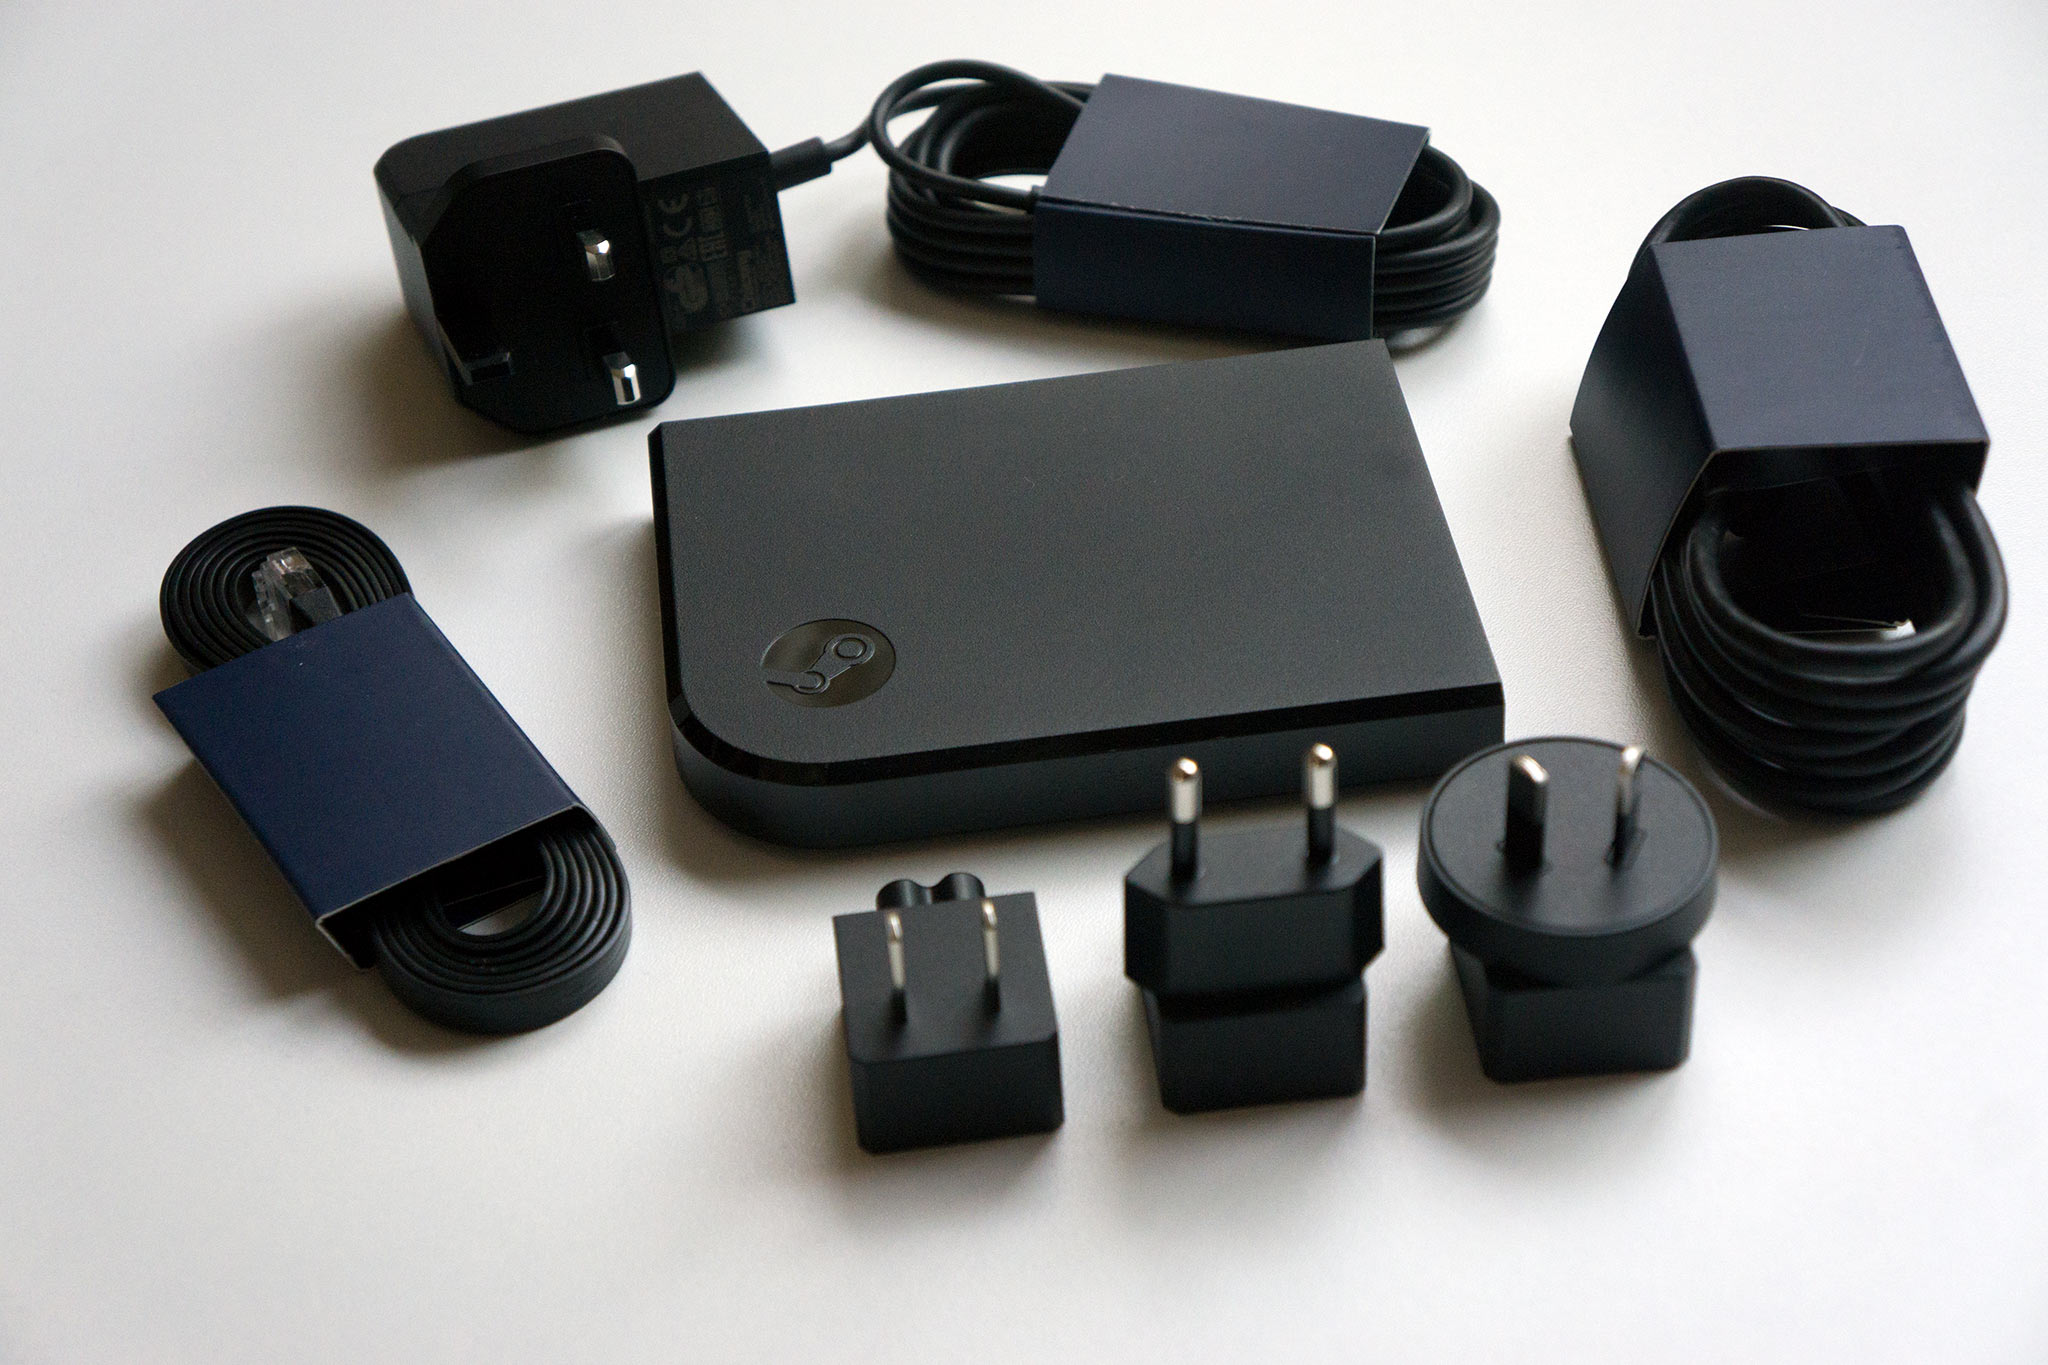 Steam Link Review An Affordable Way To Play Pc Games On The Big Screen Windows Central